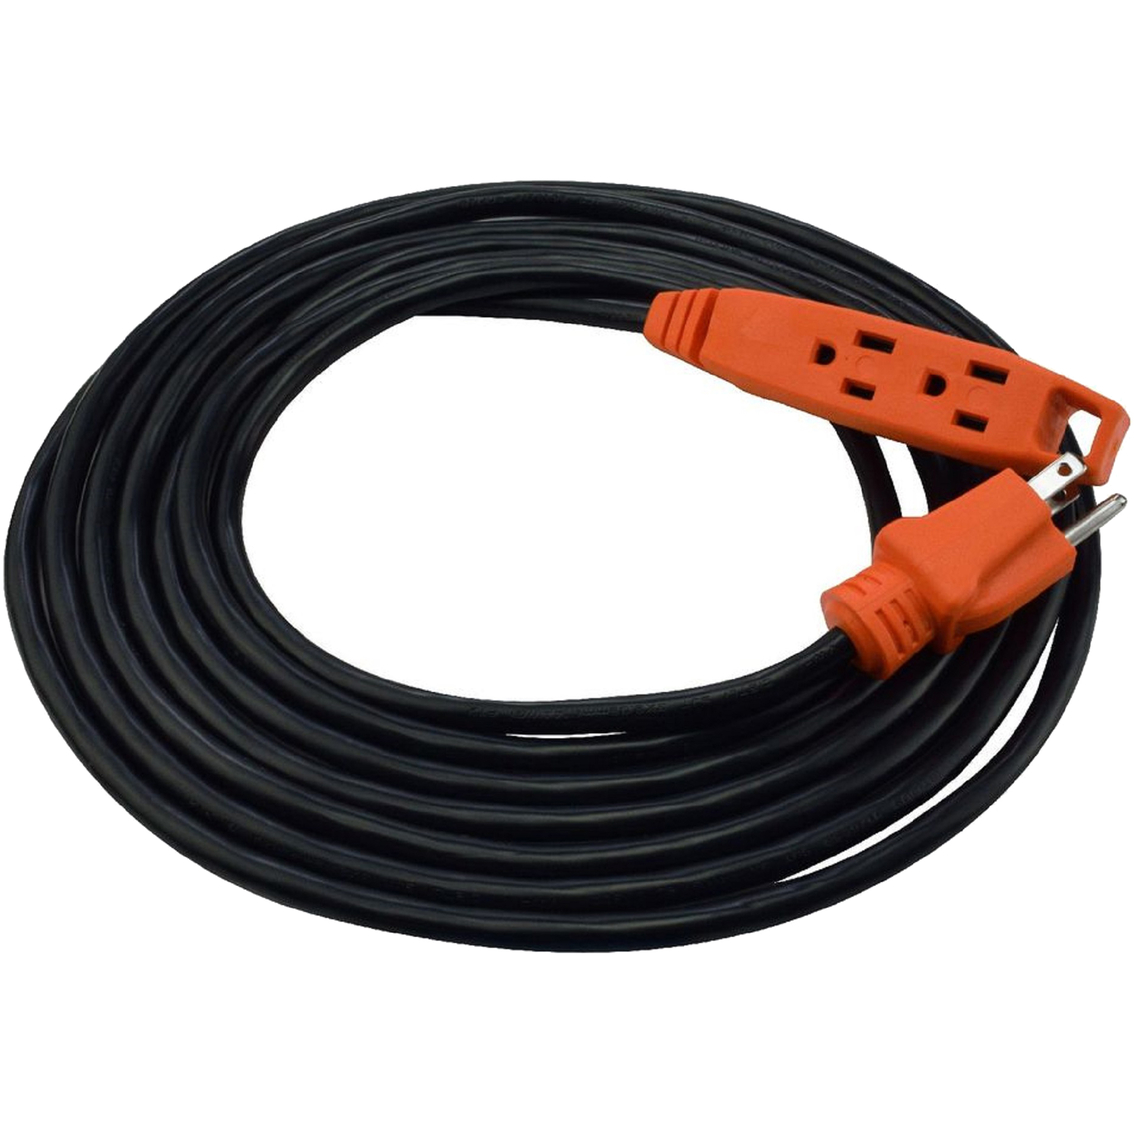 Prime Wire & Cable 15 ft. 3 Outlet Shop Cord - Image 2 of 2